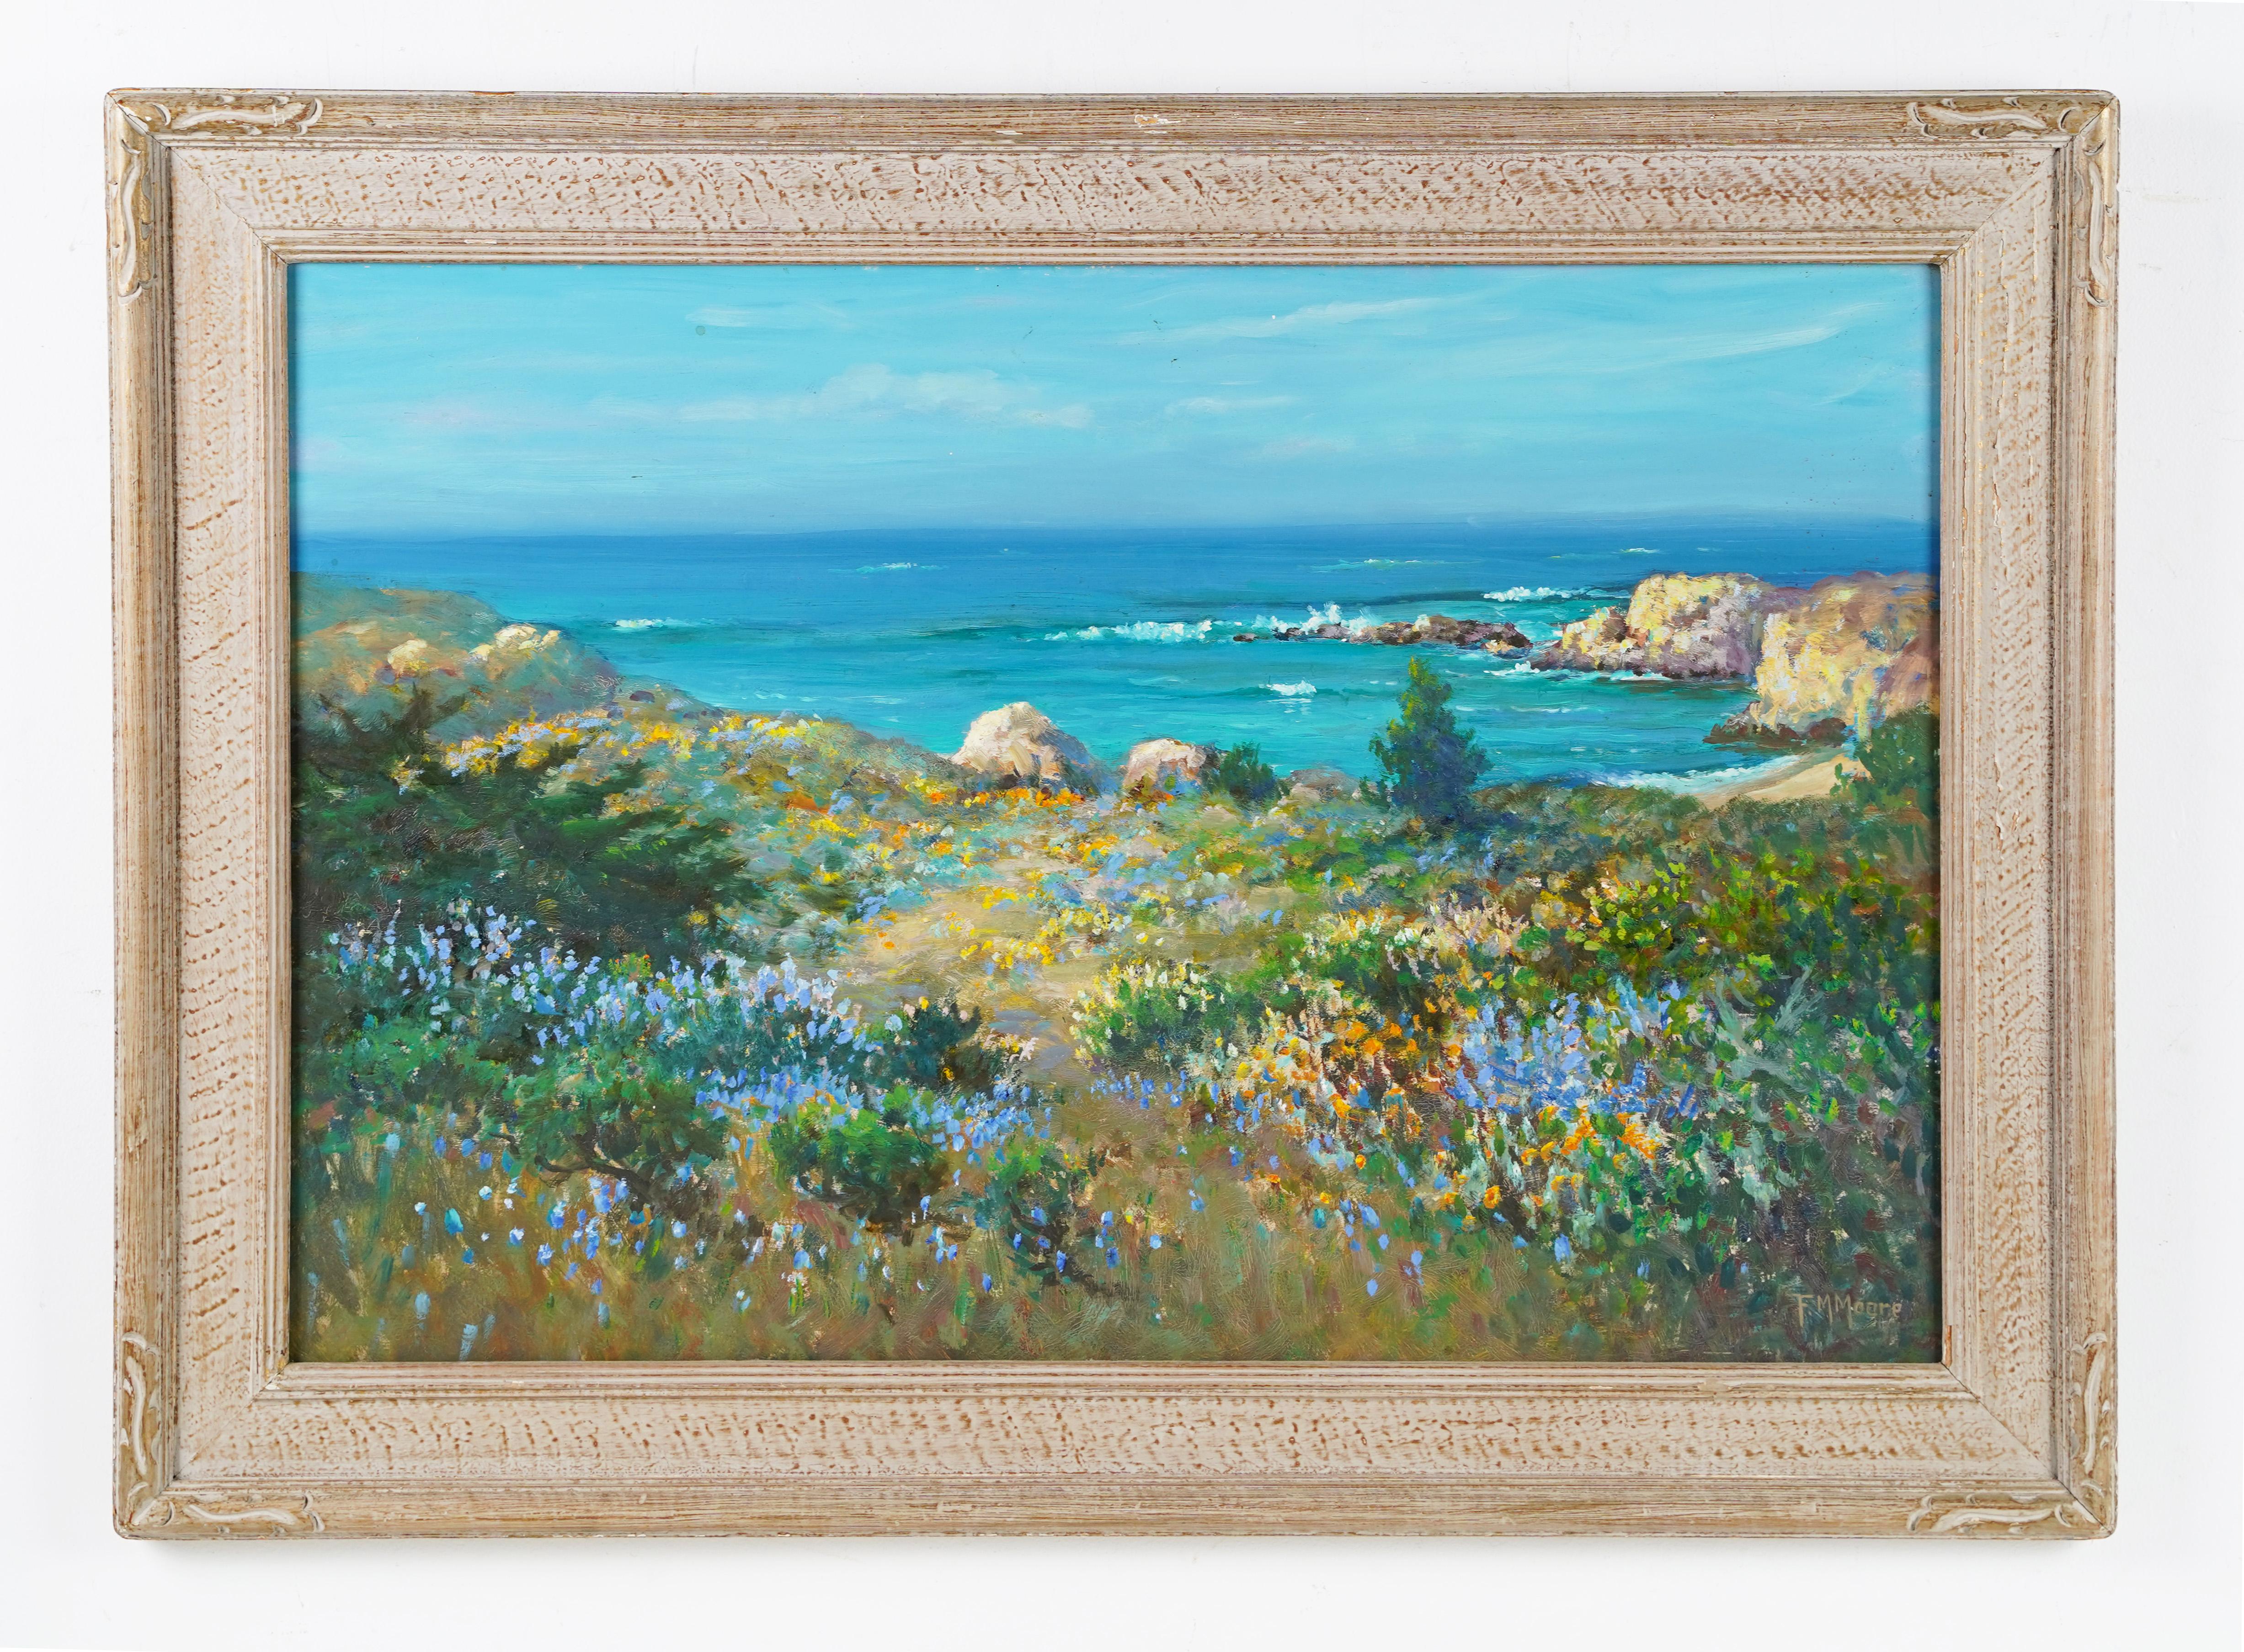 Antique American impressionist seascape signed oil painting by Frank Montague Moore (1877 - 1967).   Oil on board.  Signed.  Framed.  Image size, 30L x 20H.